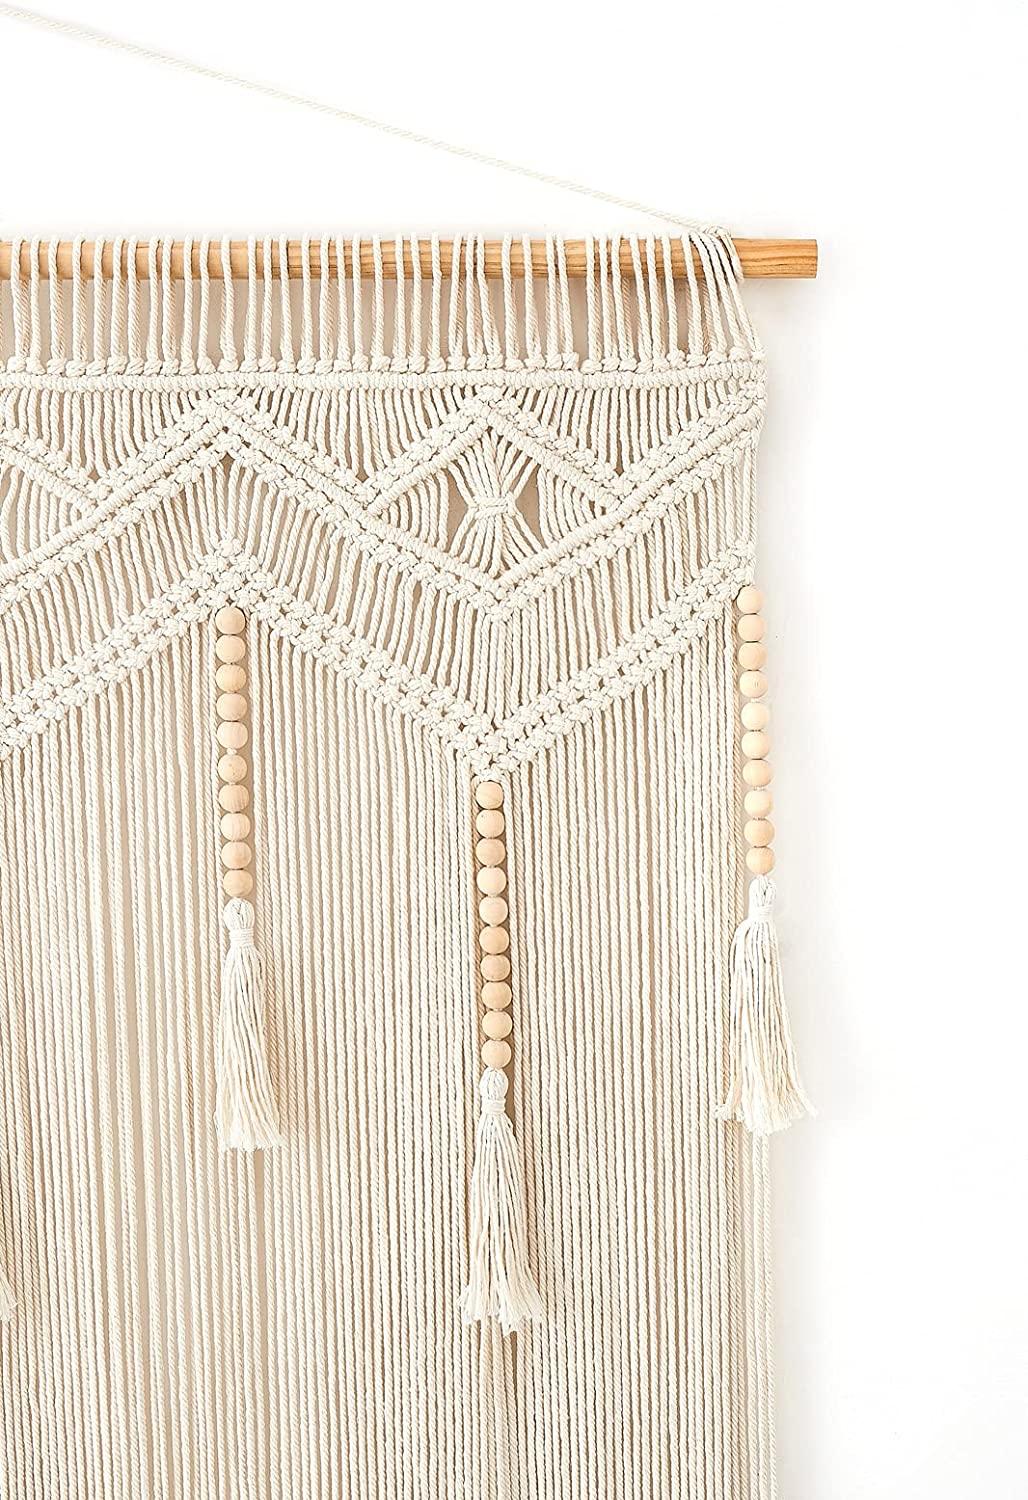 Macrame Wall Hanging Large Boho Decor Chic Tapestry Curtain Tassel - Decotree.co Online Shop